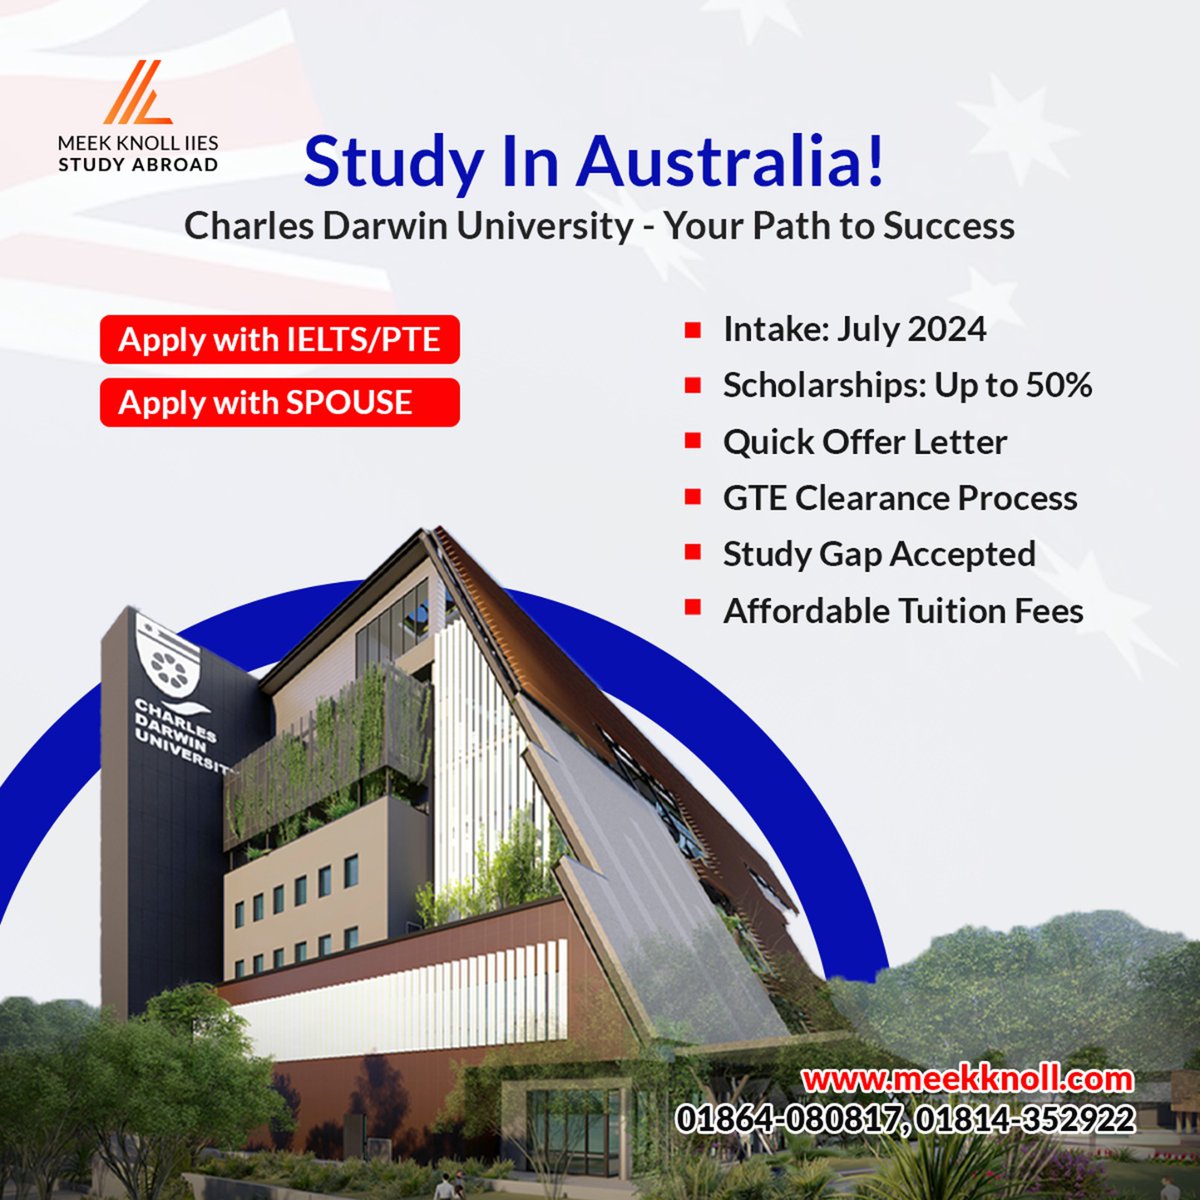 𝐒𝐭𝐮𝐝𝐲 𝐢𝐧 𝐀𝐮𝐬𝐭𝐫𝐚𝐥𝐢𝐚
✔️Charles Darwin University - Your Path to Success!
✔️Apply with IELTS/PTE
✔️Intake: July 2024
⭕ Register Now:
meekknoll.com/public/get-adv…
📞 Contact Us: 01864080817, 01814352922, 01814192393
 #BangladeshToAustralia #InternationalEducation